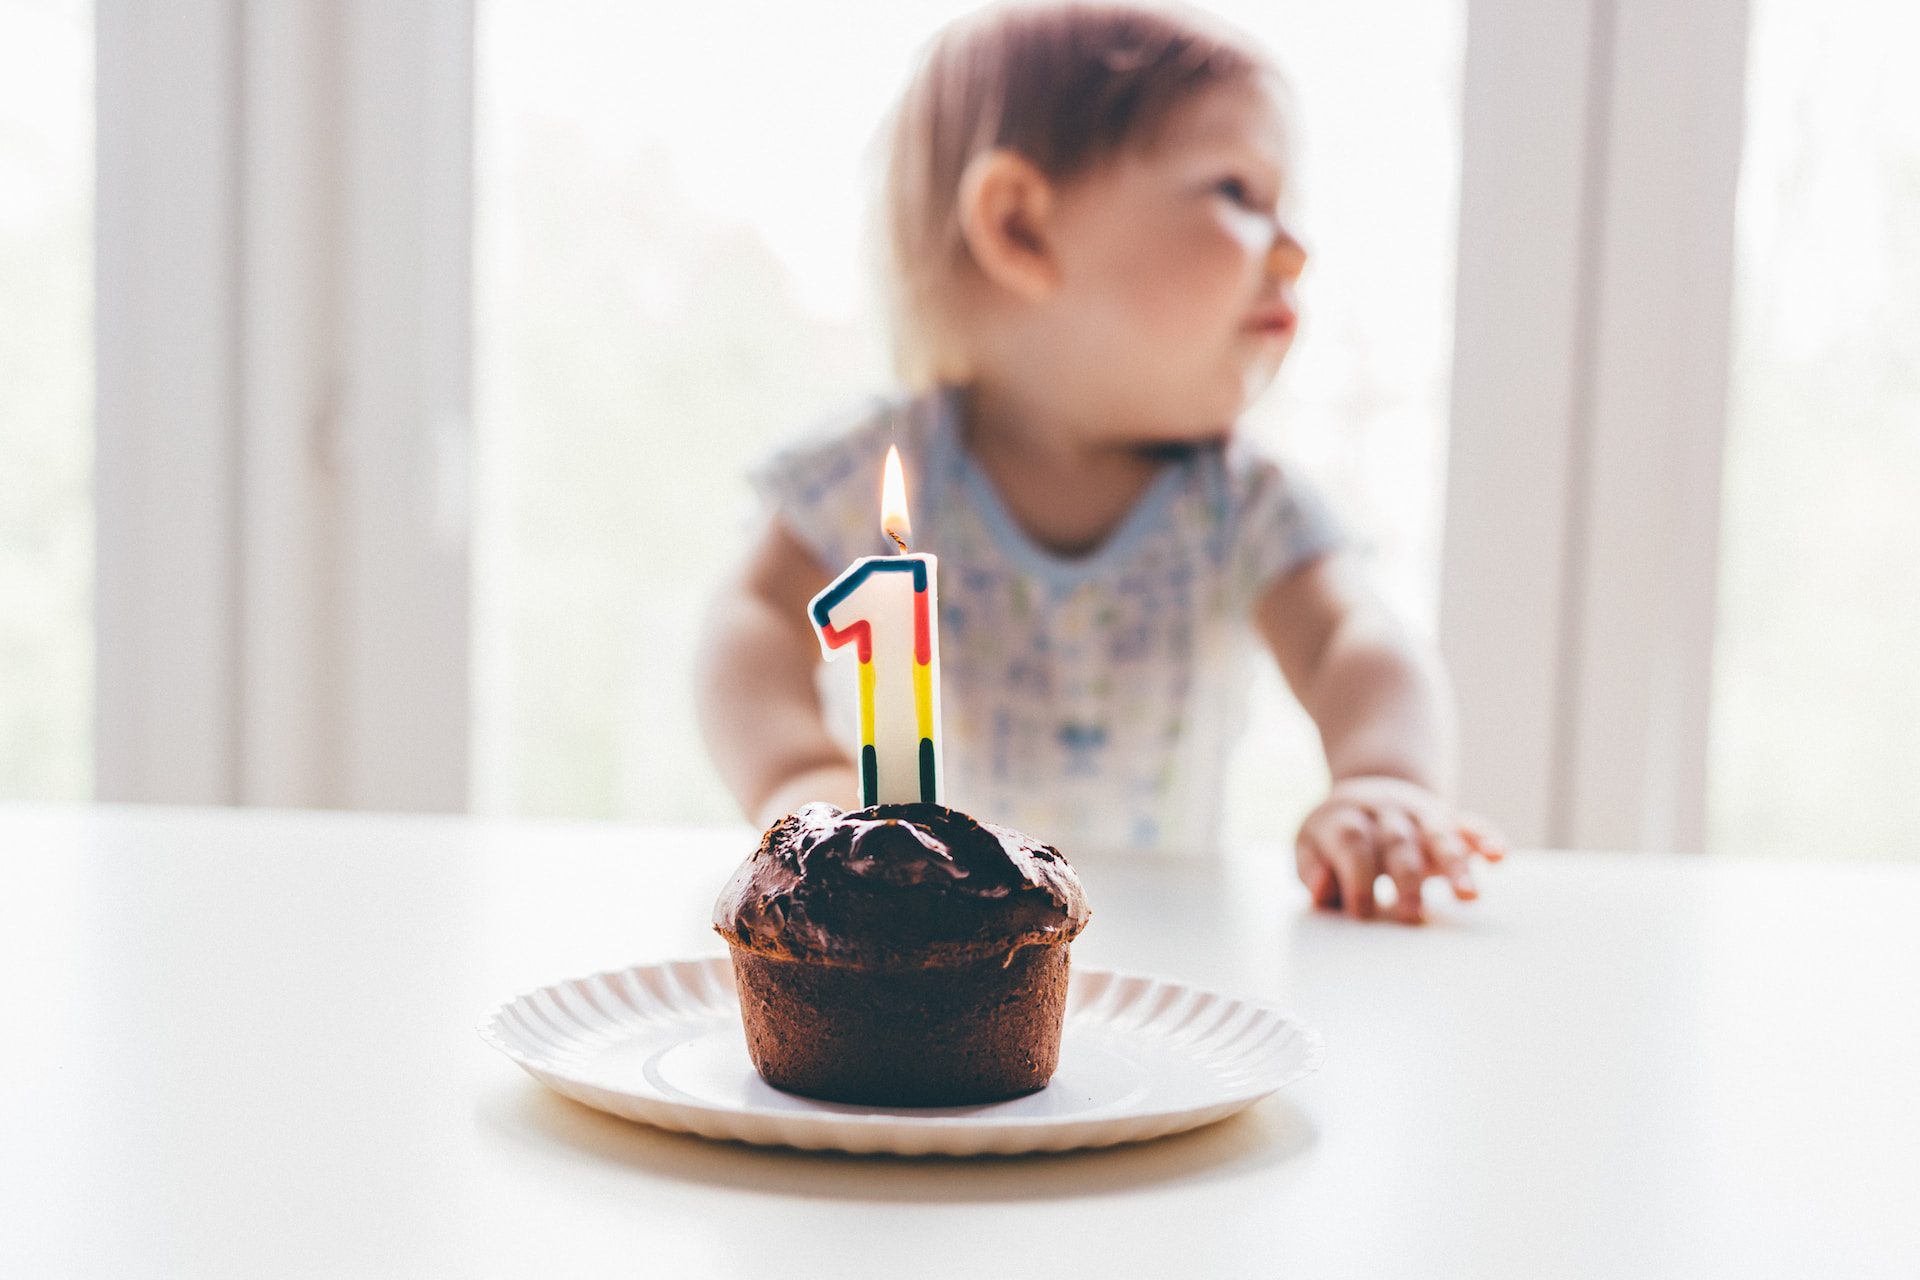 Image shows baby with cupcake and candle shaped in the number 1 to show the idea of creating your first resume.